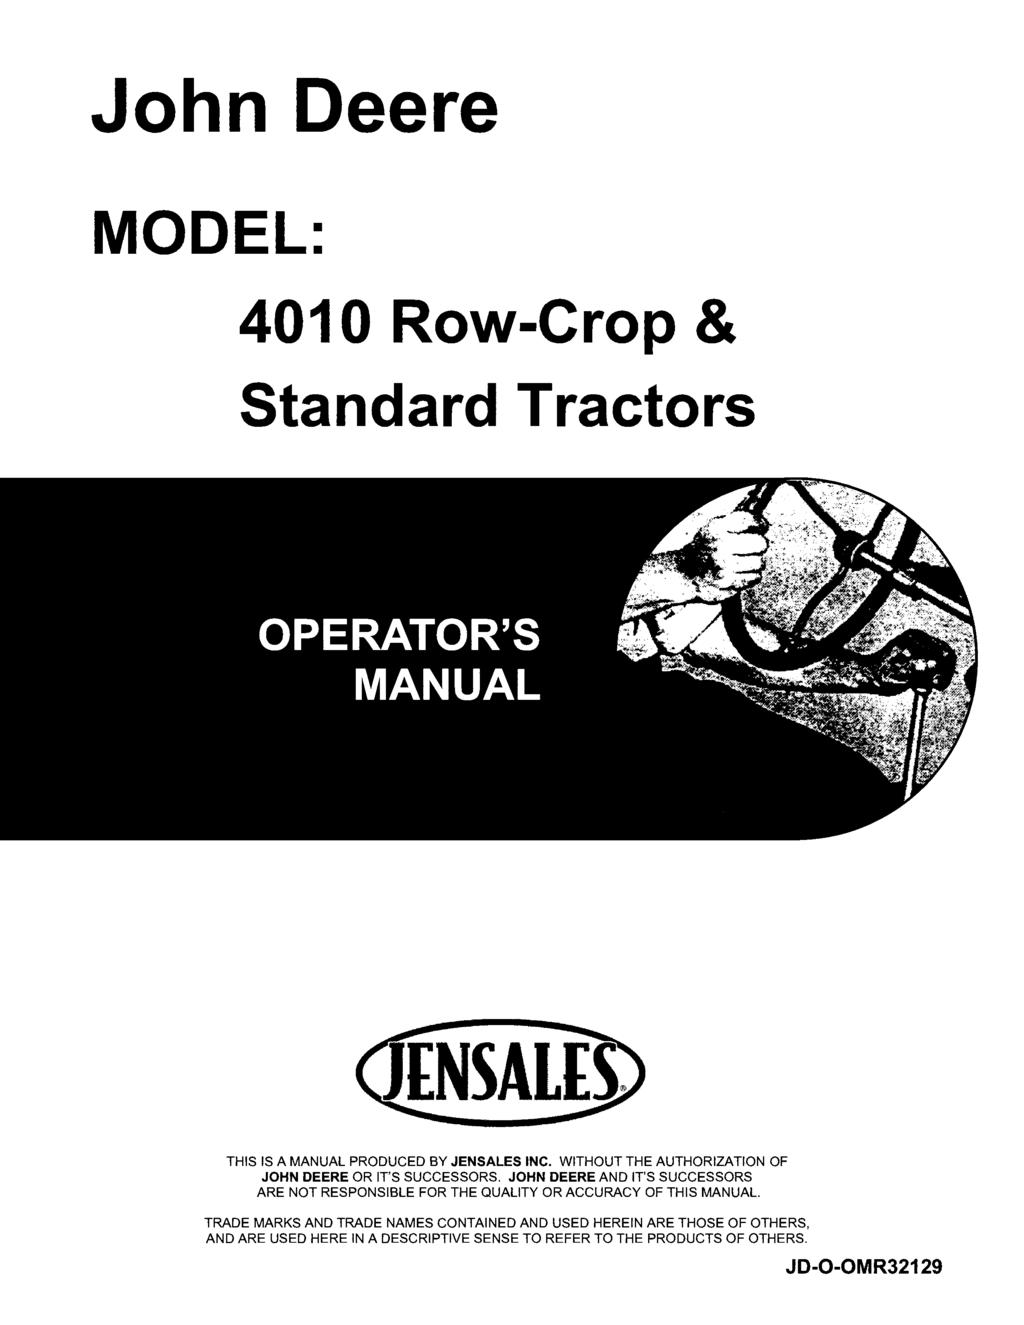 John Deere MODEL: 401 0 Row-Crop & Standard Tractors THIS IS A MANUAL PRODUCED BY JENSALES INC. WITHOUT THE AUTHORIZATION OF JOHN DEERE OR IT'S SUCCESSORS.